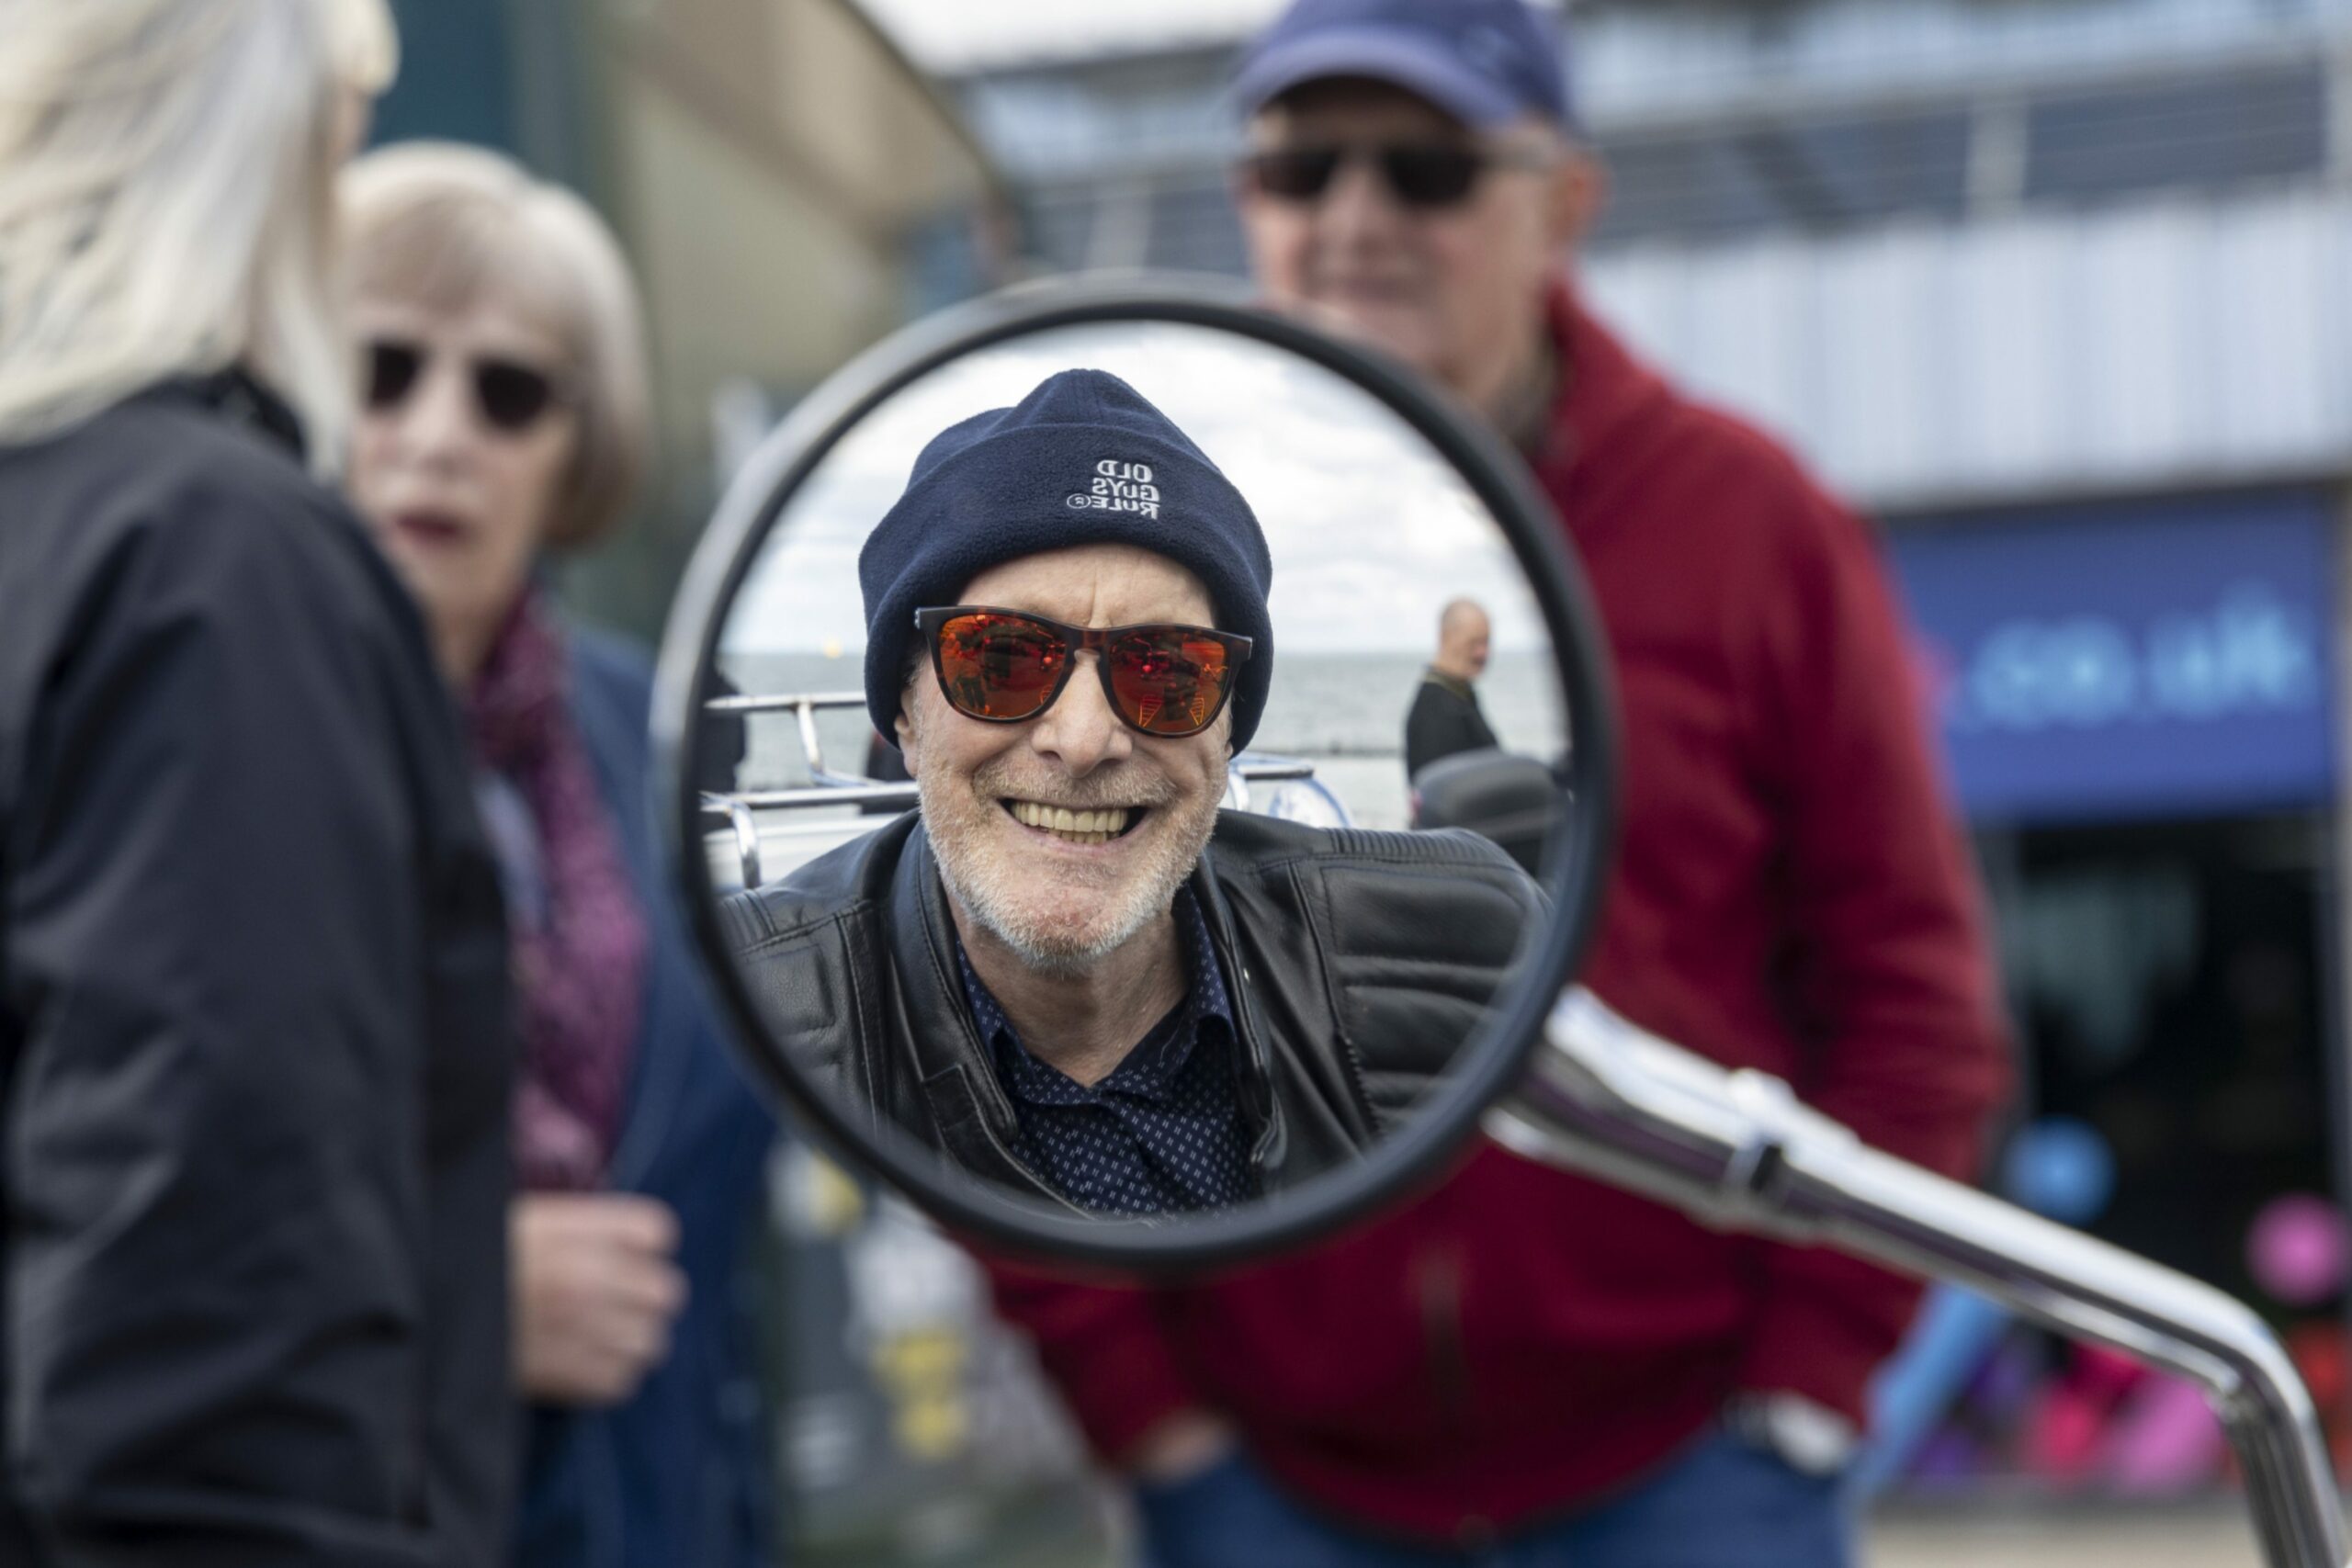 A smiling Edwin can be seen in the mirrors of his bike.